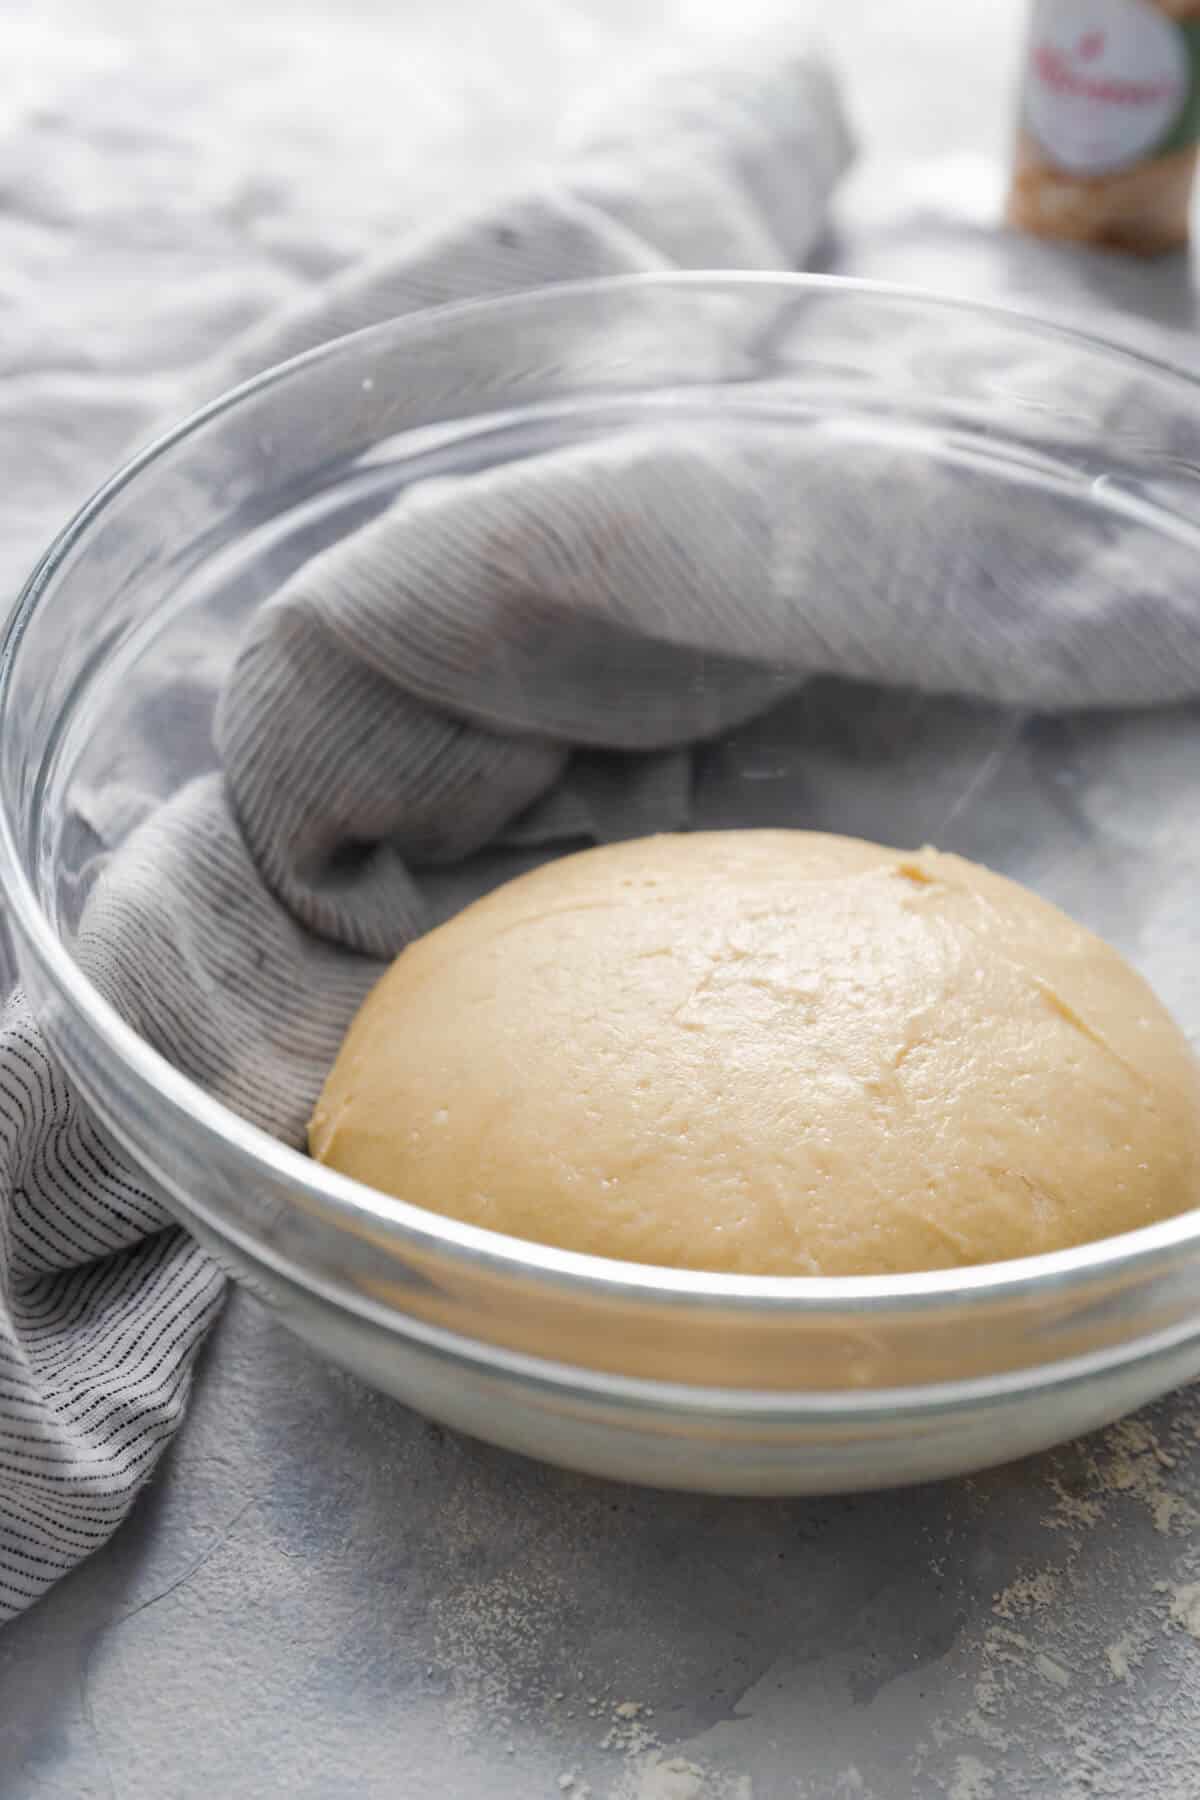 side angle close up photo of a glass bowl with dough rising inside